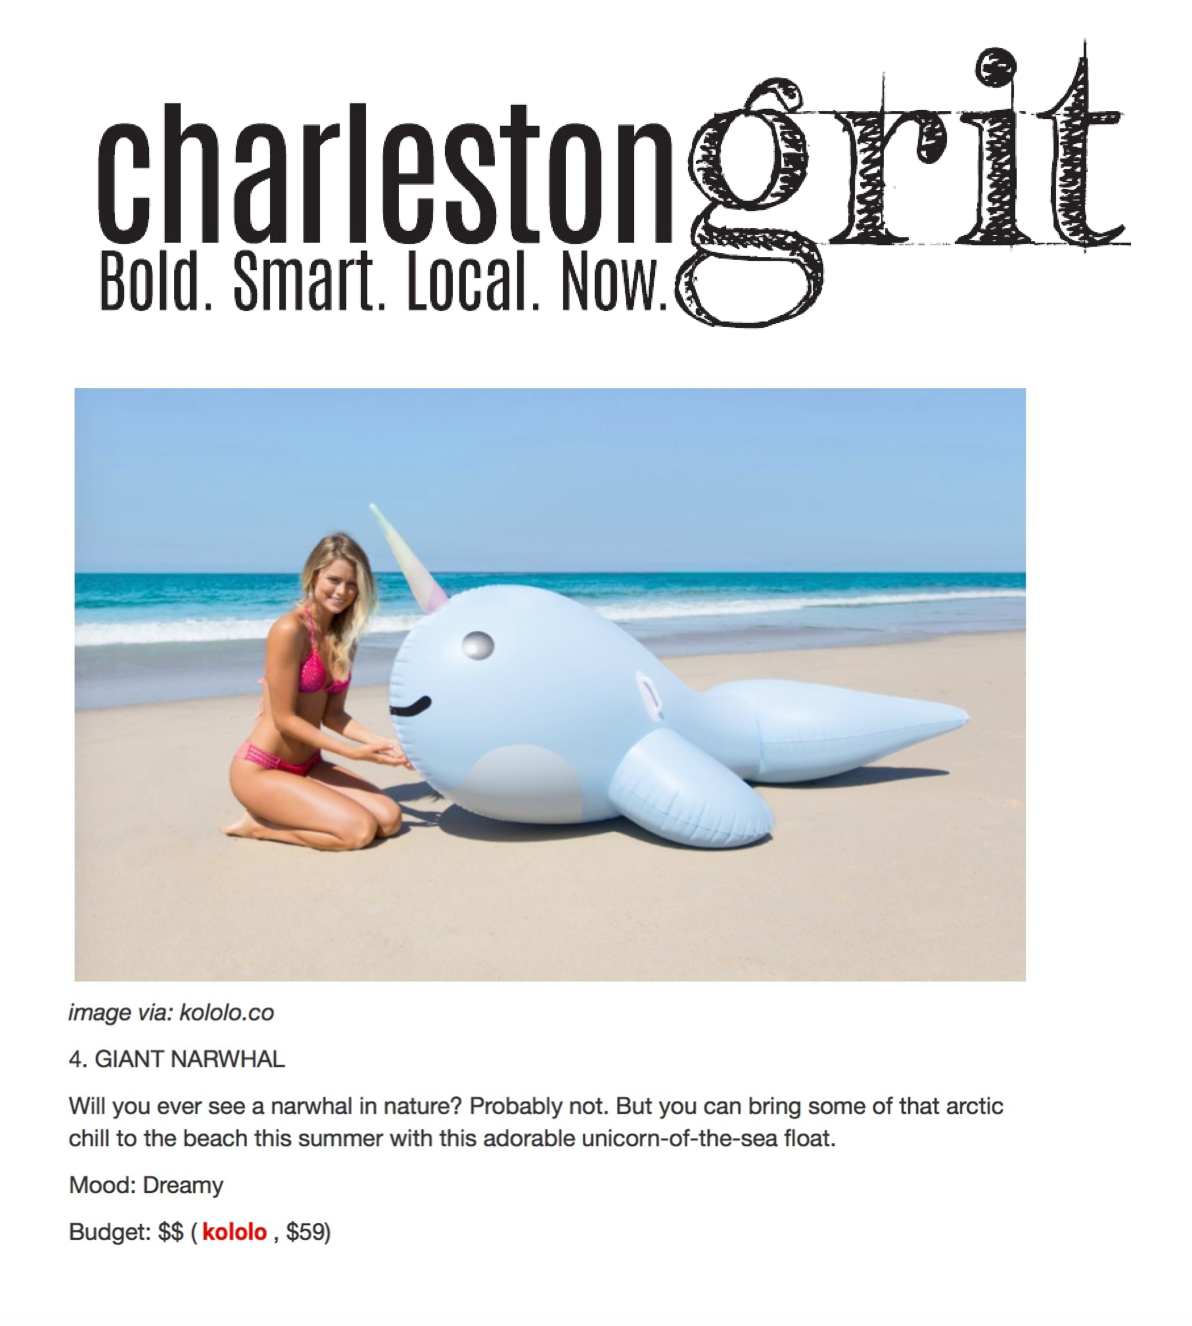 Charleston Grit: 7 POOL FLOATS TO INSTAGRAM THIS MEMORIAL DAY